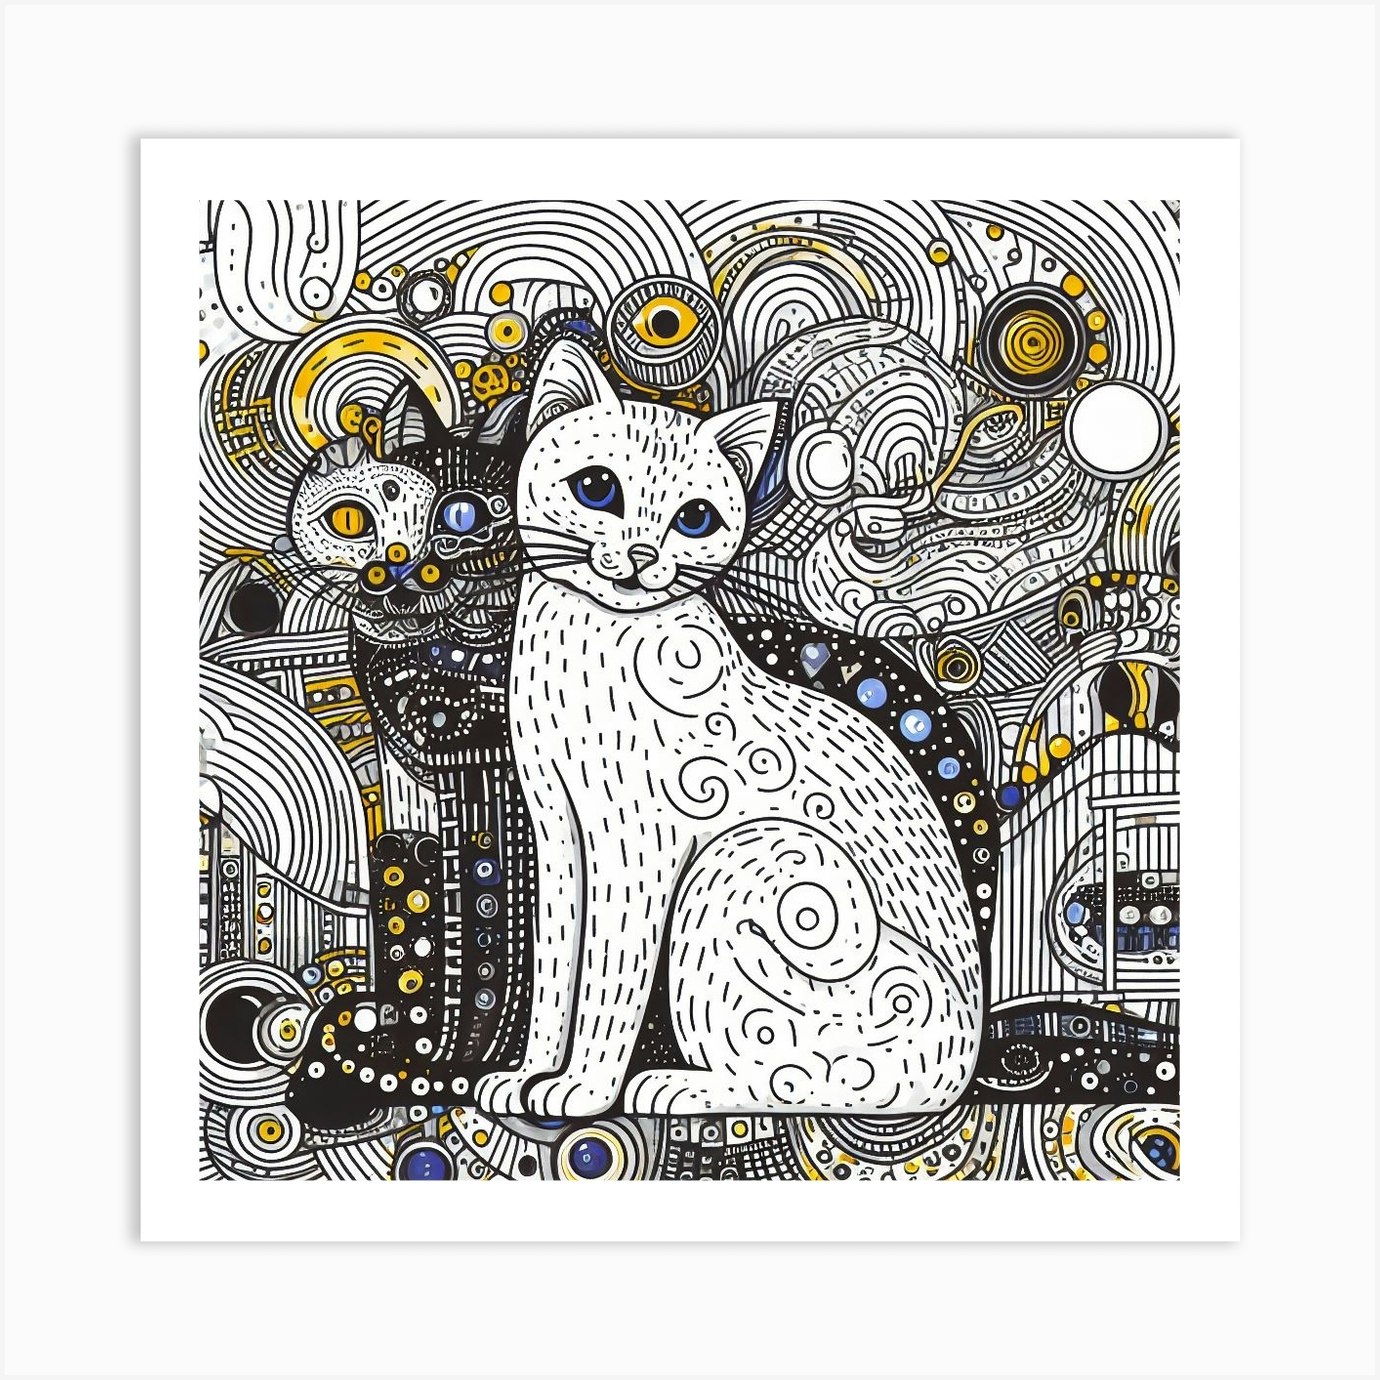 Black and White Printable Art, Zentangle Inspired Ink Drawing